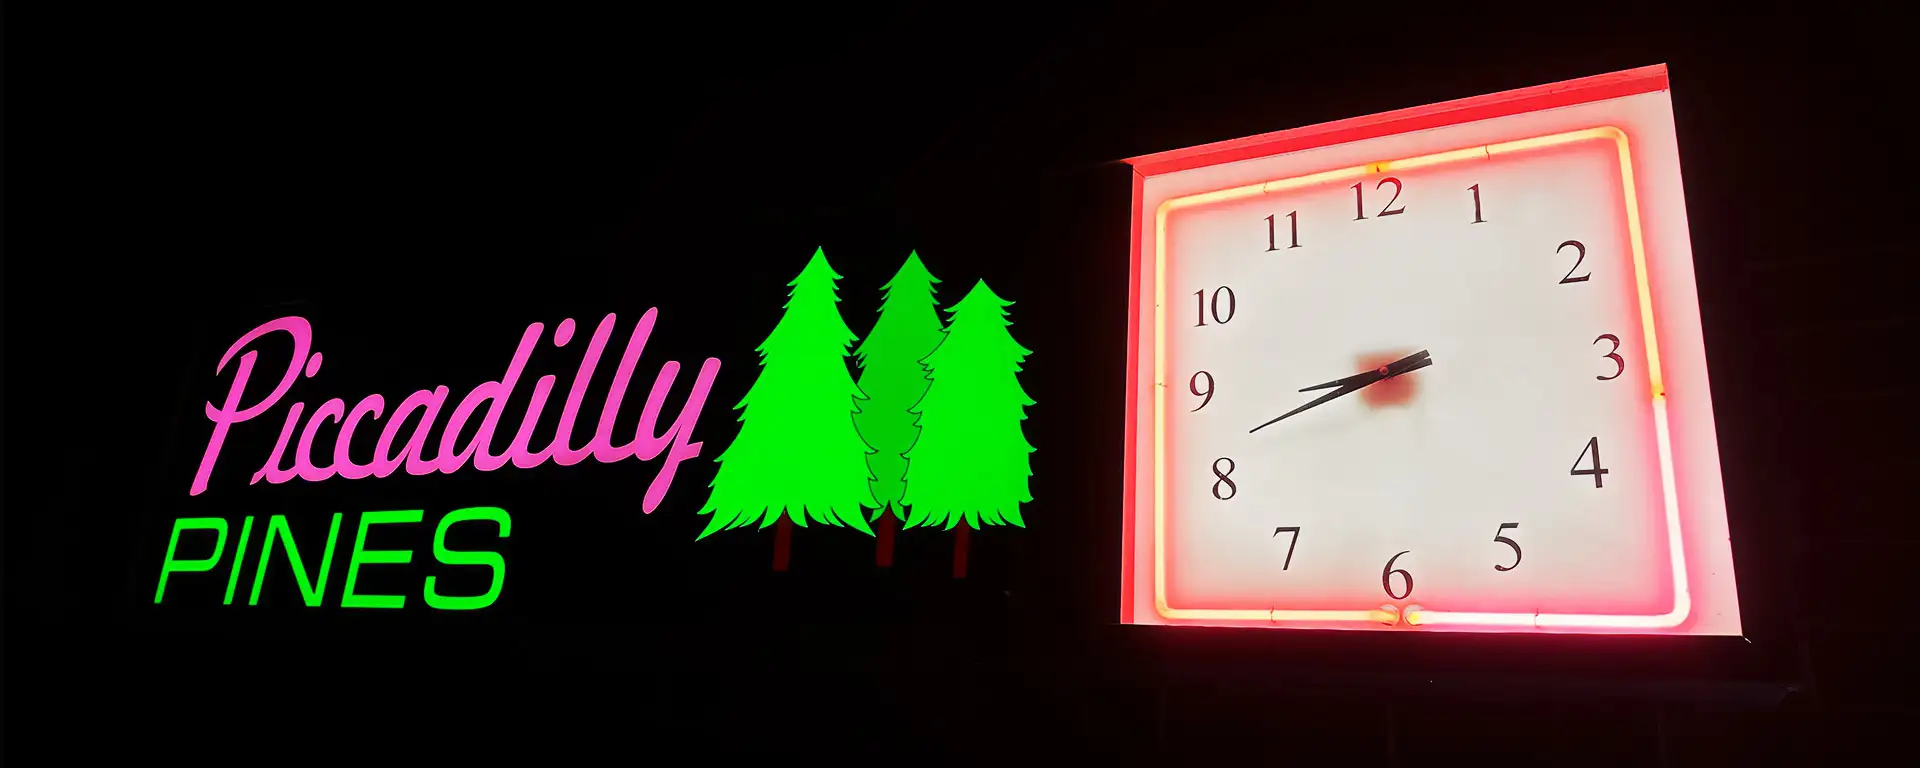 Piccadilly Pines Logo & Neon Clock